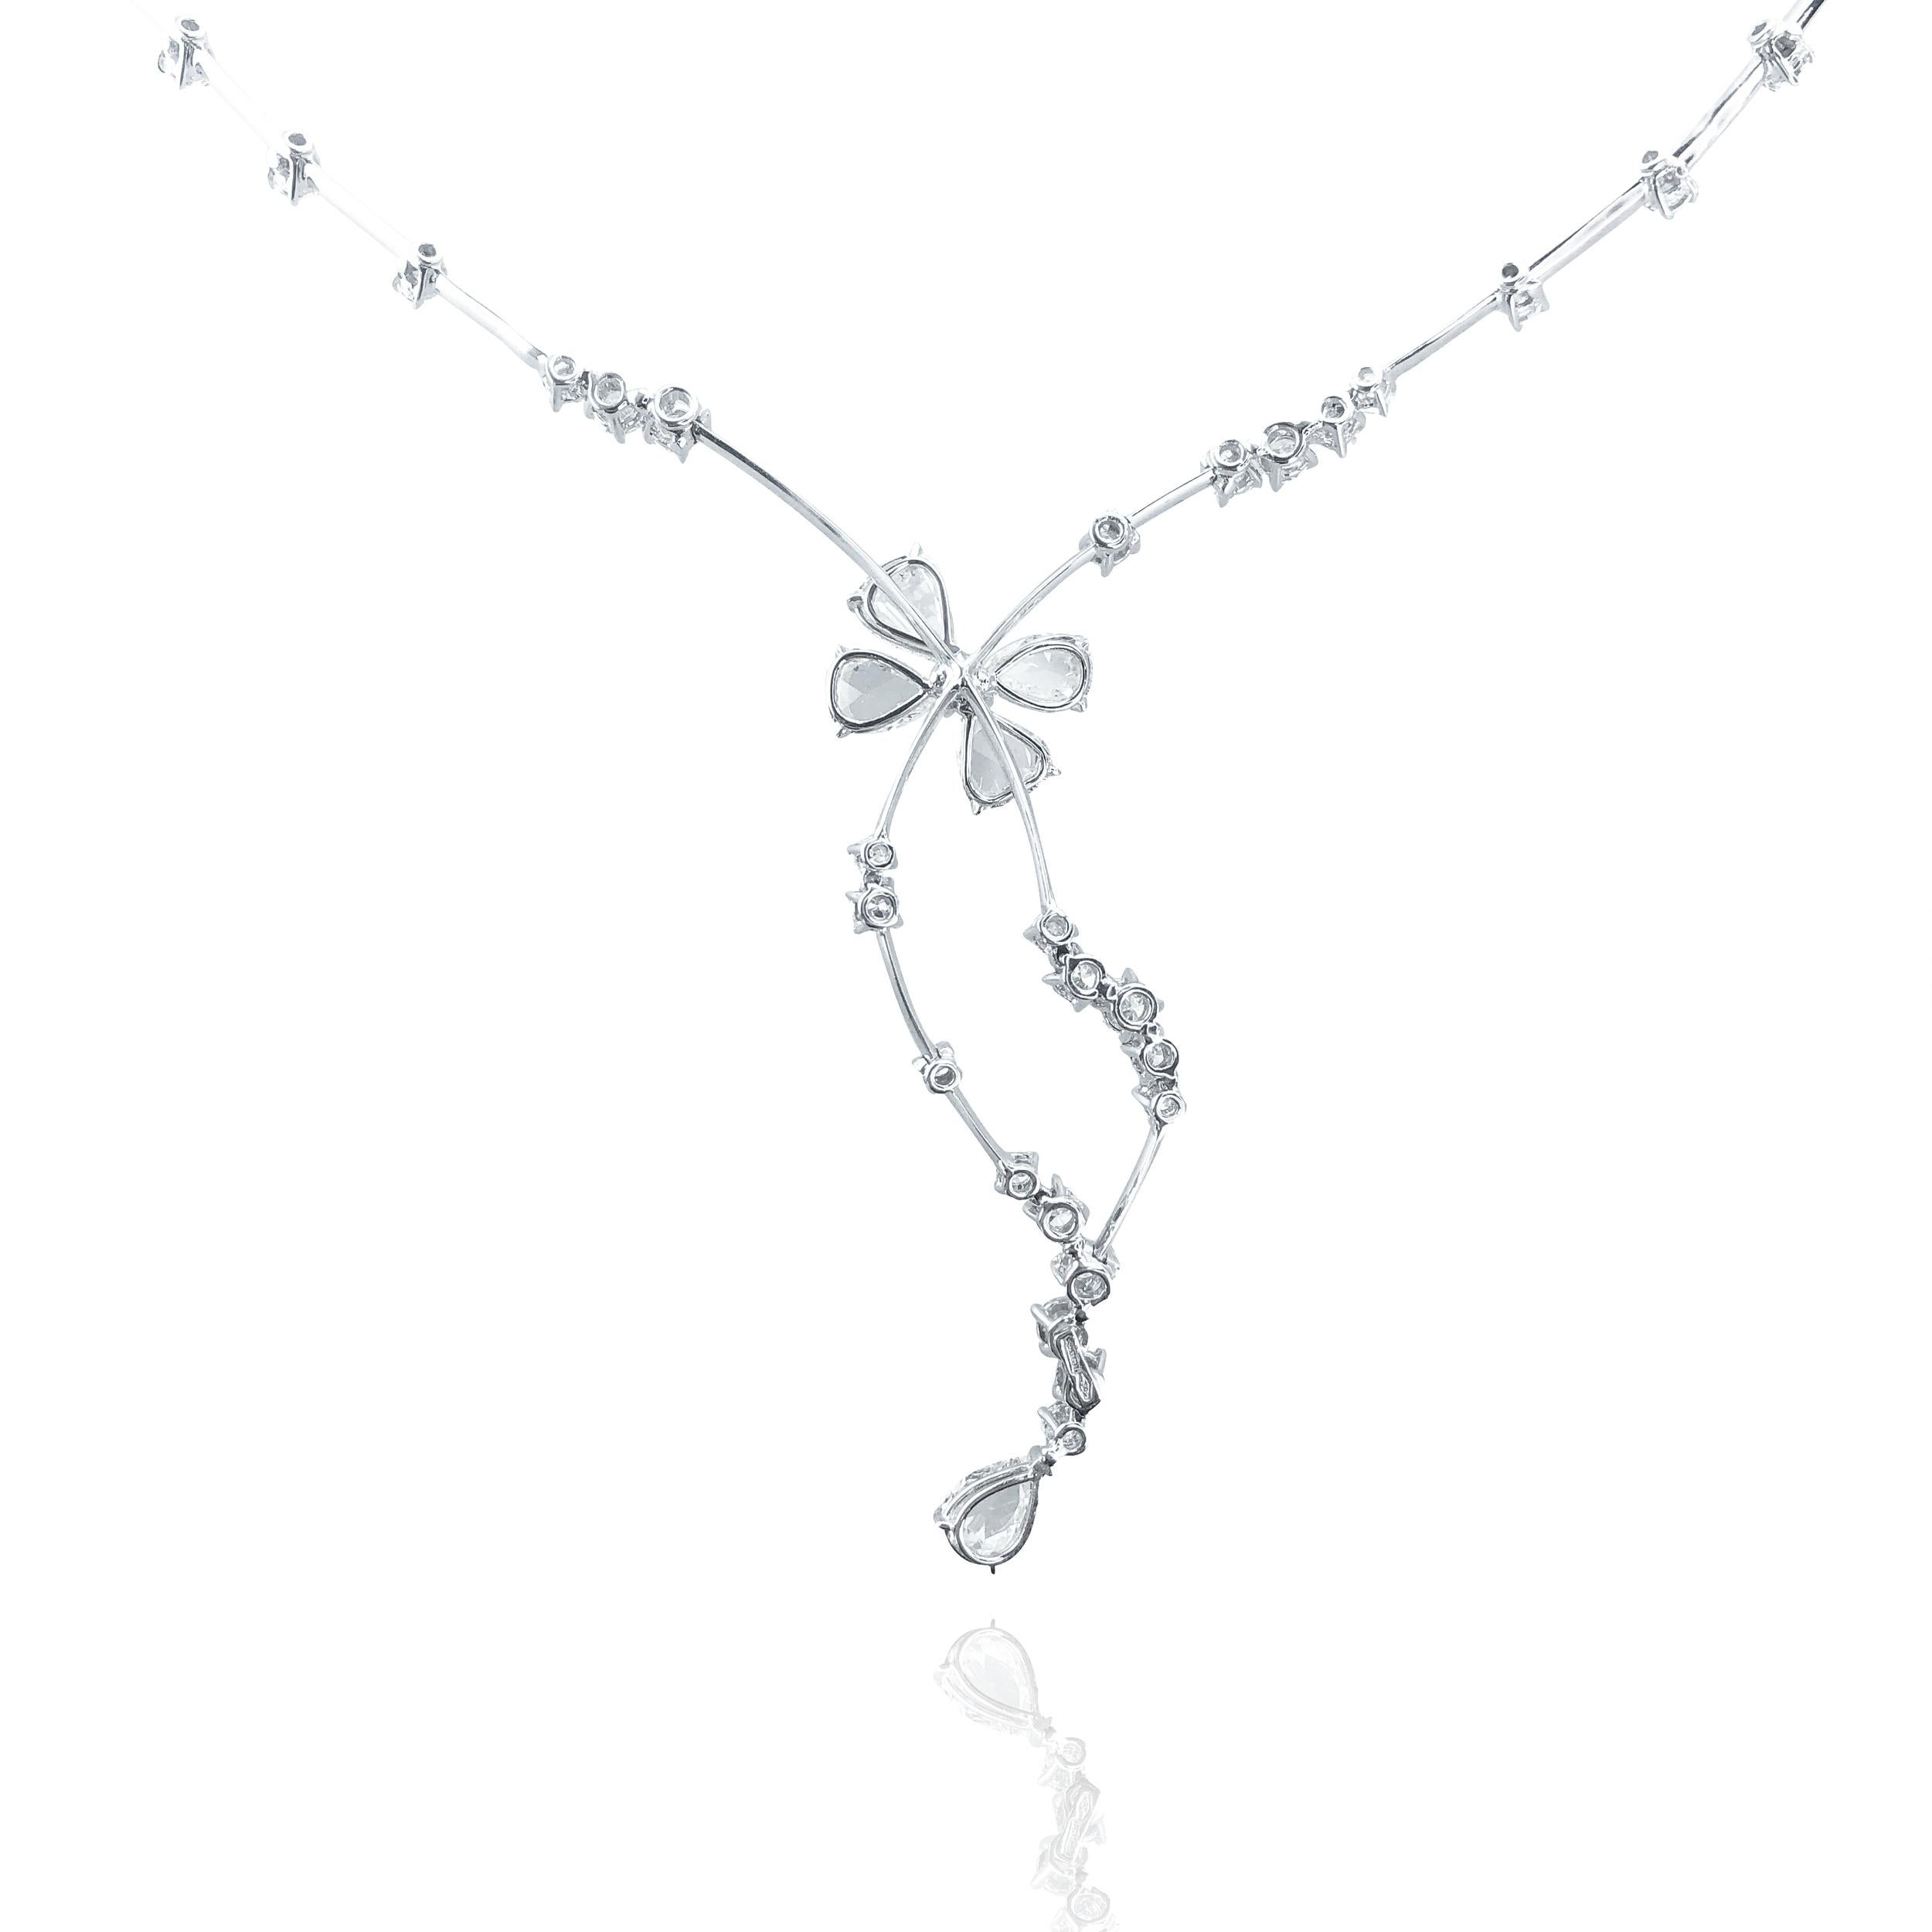 This Rose Cut Bow necklace of 6.18 Carat pure natural diamonds, is set in 18kt white Gold.

The unique chain consists of fine firm white Gold dressed with circular brilliant cut diamonds every 1 cm along the entire chain. 

Leading to the centre